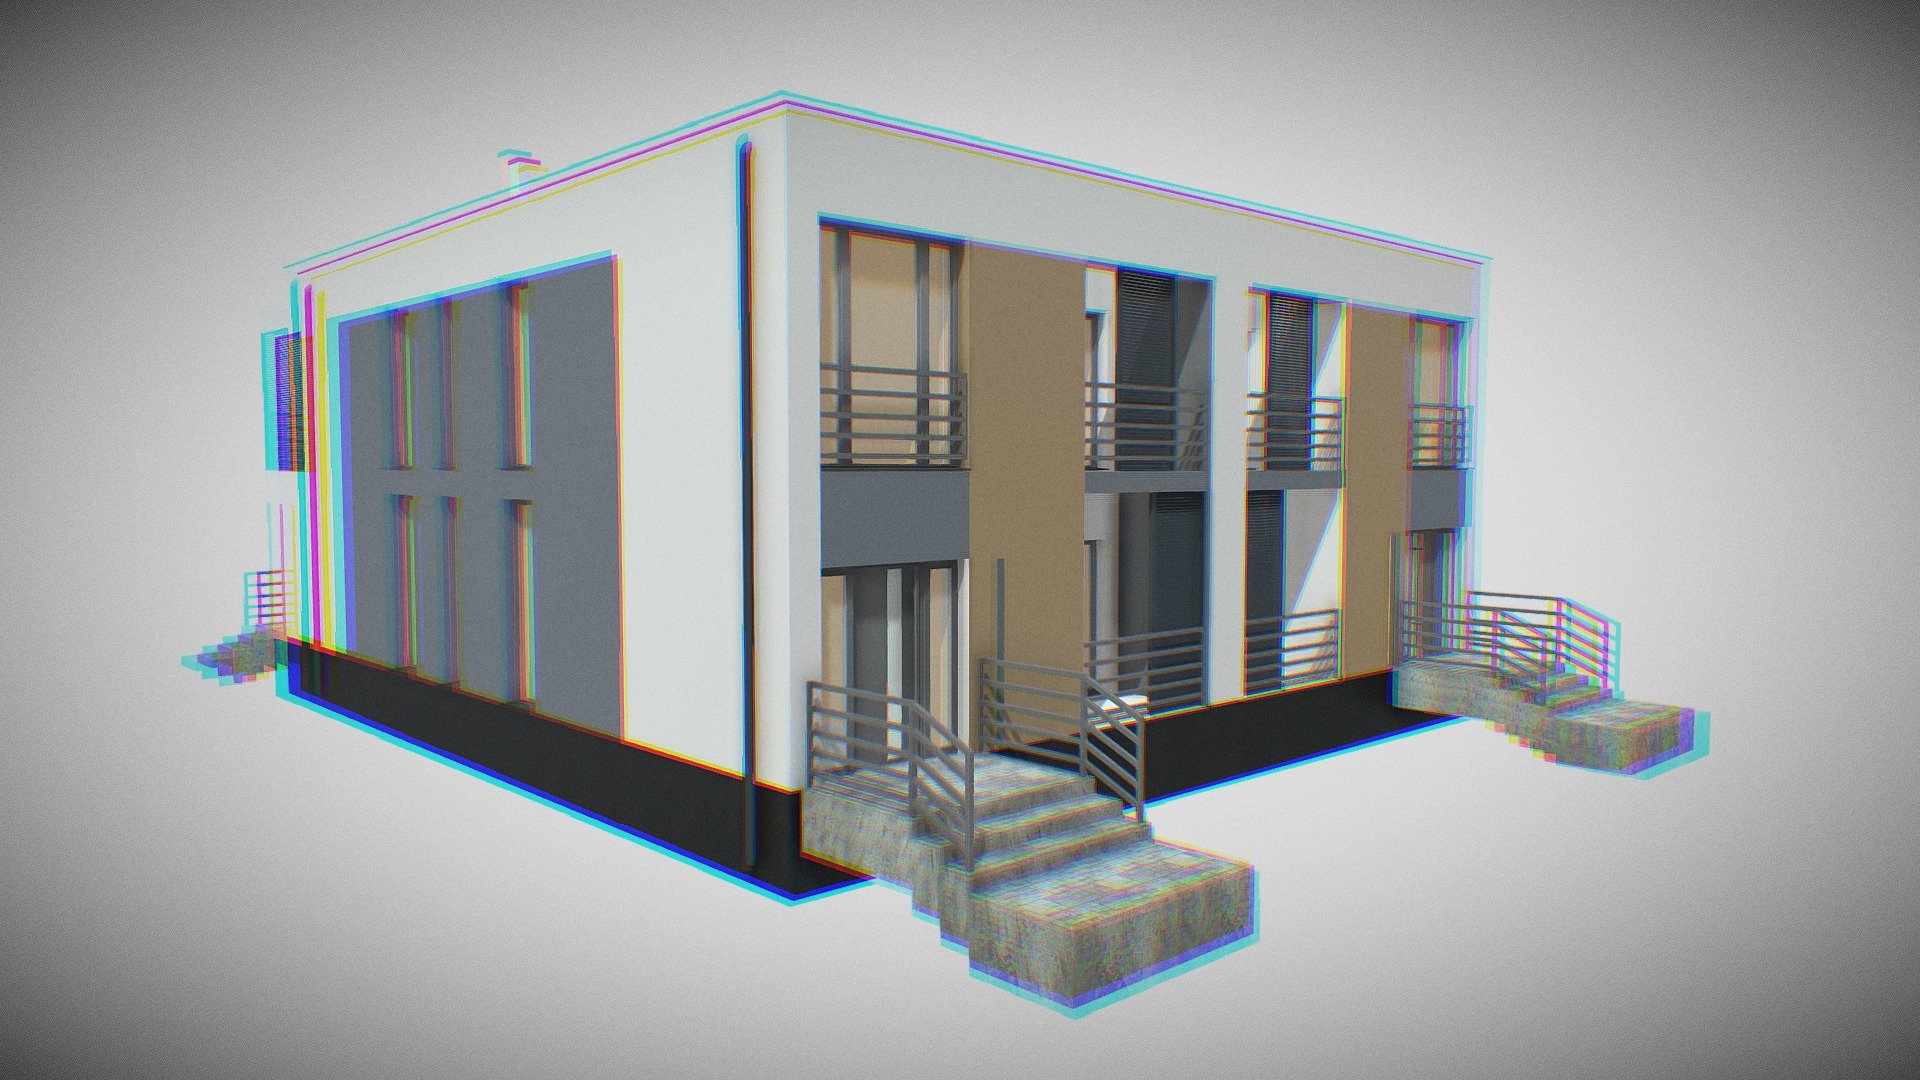 projektelewacji and model3dpl model Single family house If You need to use model in twinmotion or as a background model in Your design, that will be great. and if You like please follow me on Youtube https://www.youtube.com/c/archicadtutorials

Single-family building - a house model made for the facade design. A single-family house with an added garage and a very delicate arcade. Ceramic tile on the roof, wooden lamellas at the entrance

szozda jednorodzinny itoka - Modern Twin House By Kris Szozda - Download Free 3D model by model3dpl 3d model